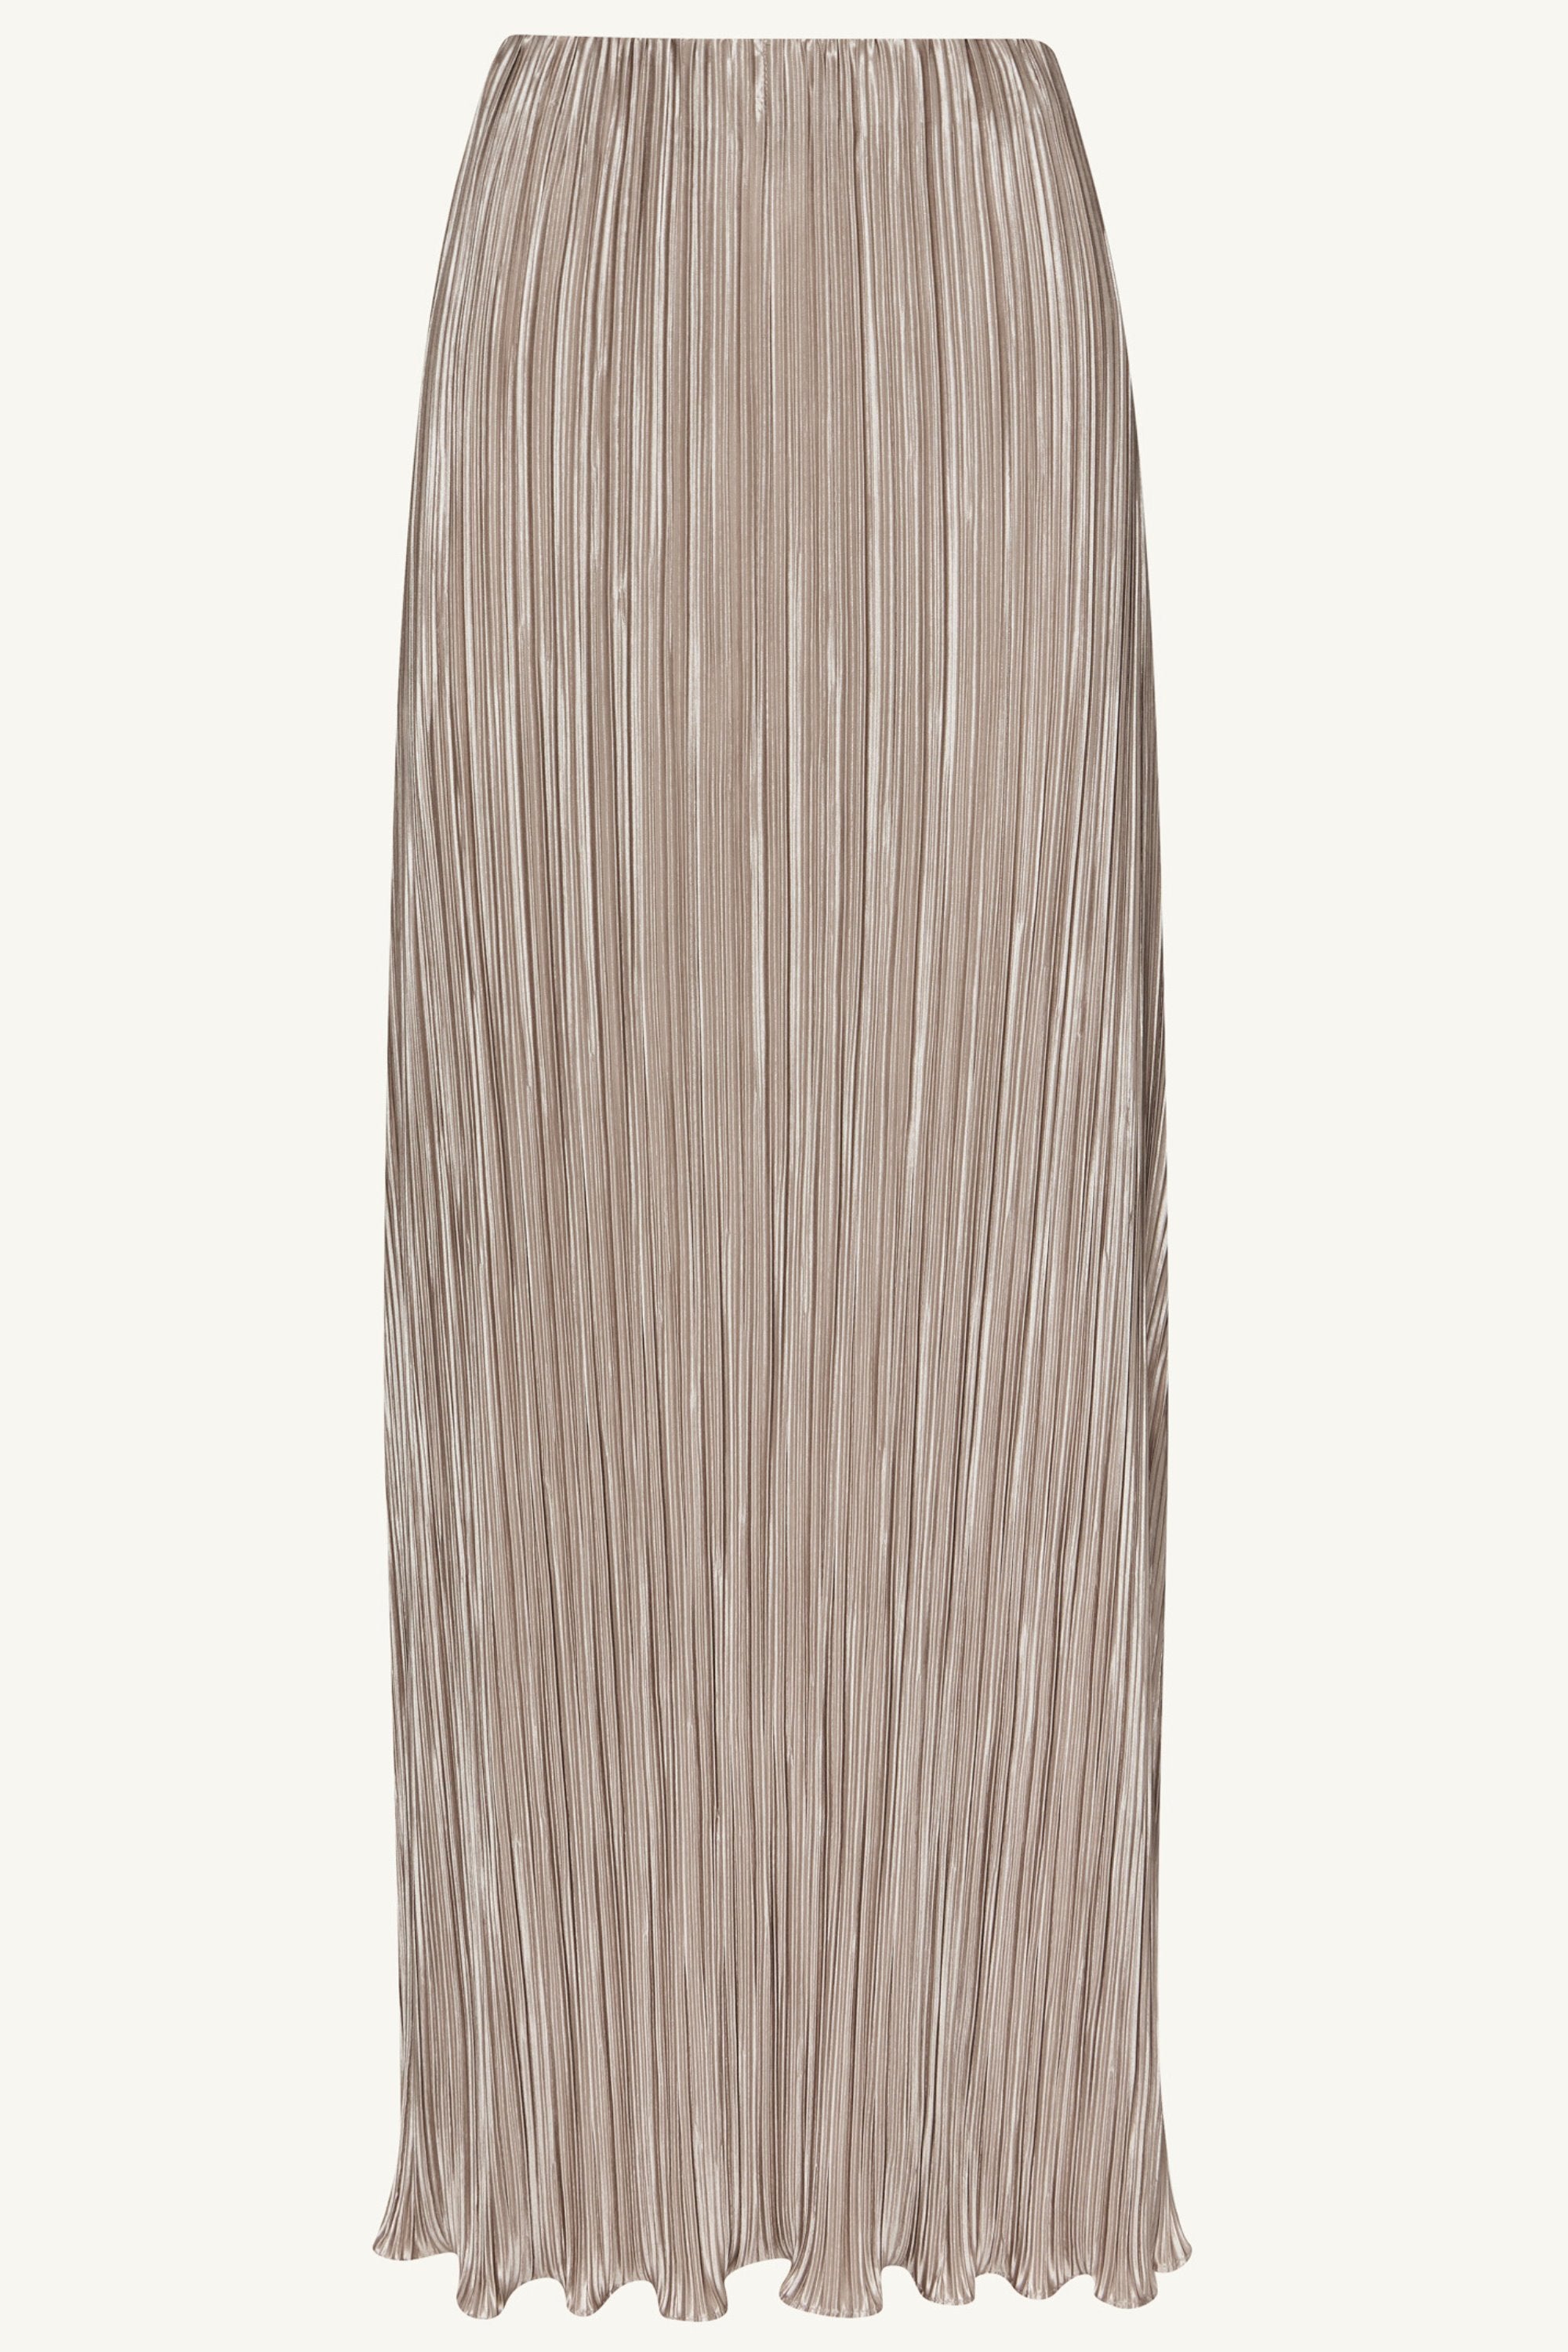 Satin Plisse Side Rouched Maxi Skirt - Taupe Clothing Veiled 